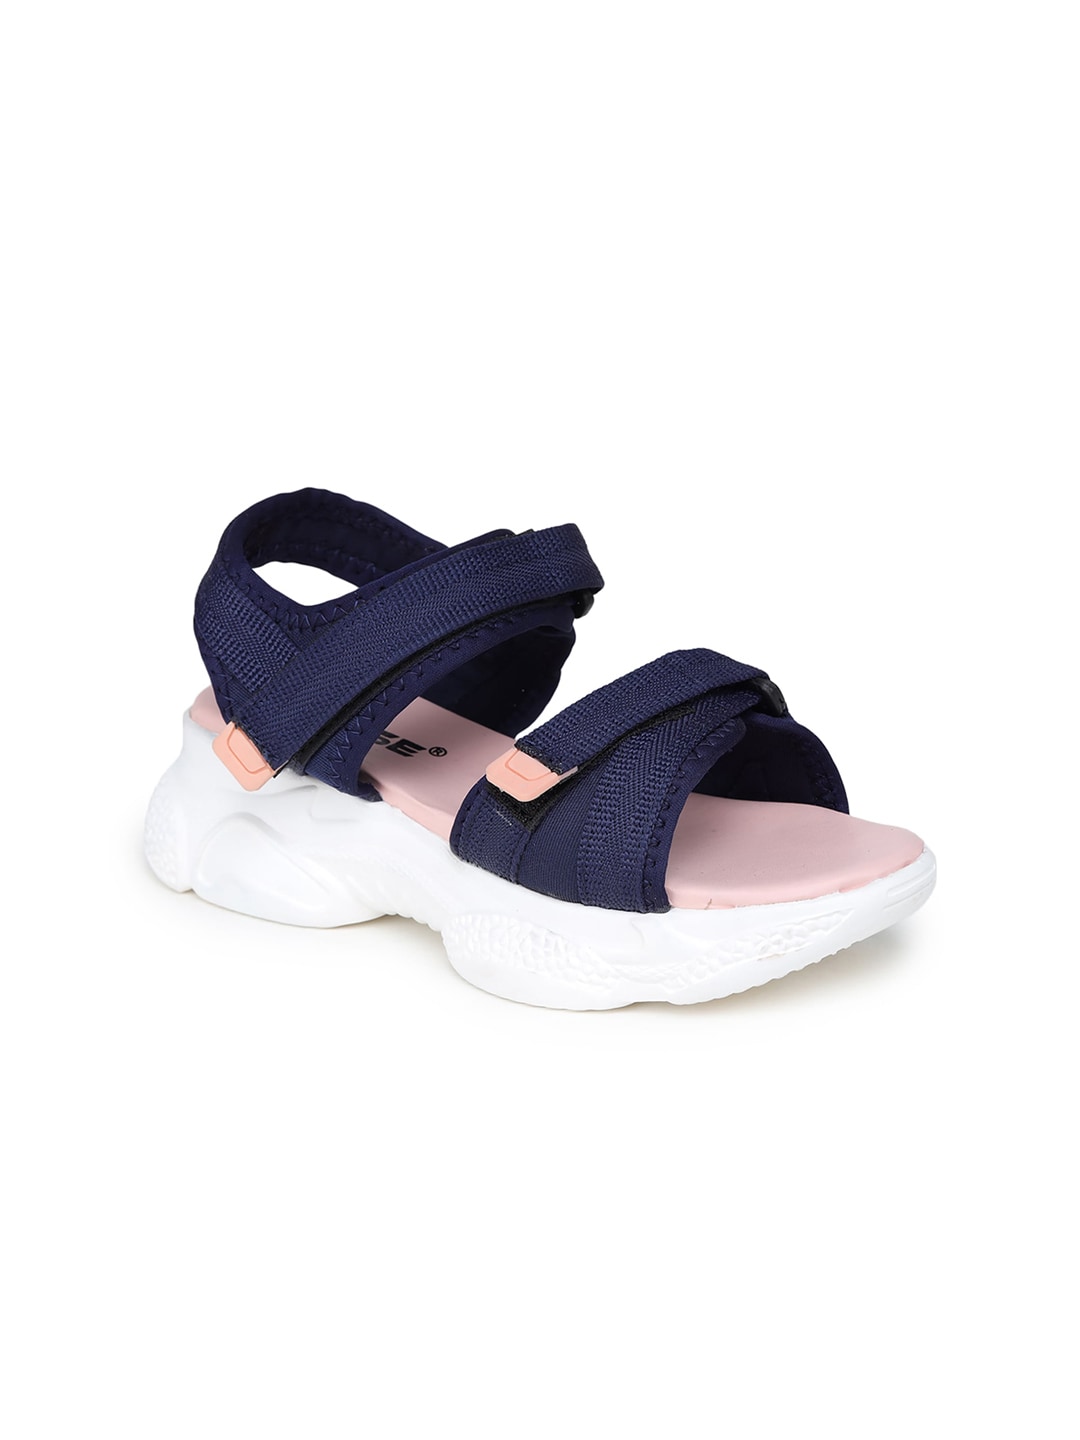 TRASE Navy Blue and Pink Sports Sandals Price in India